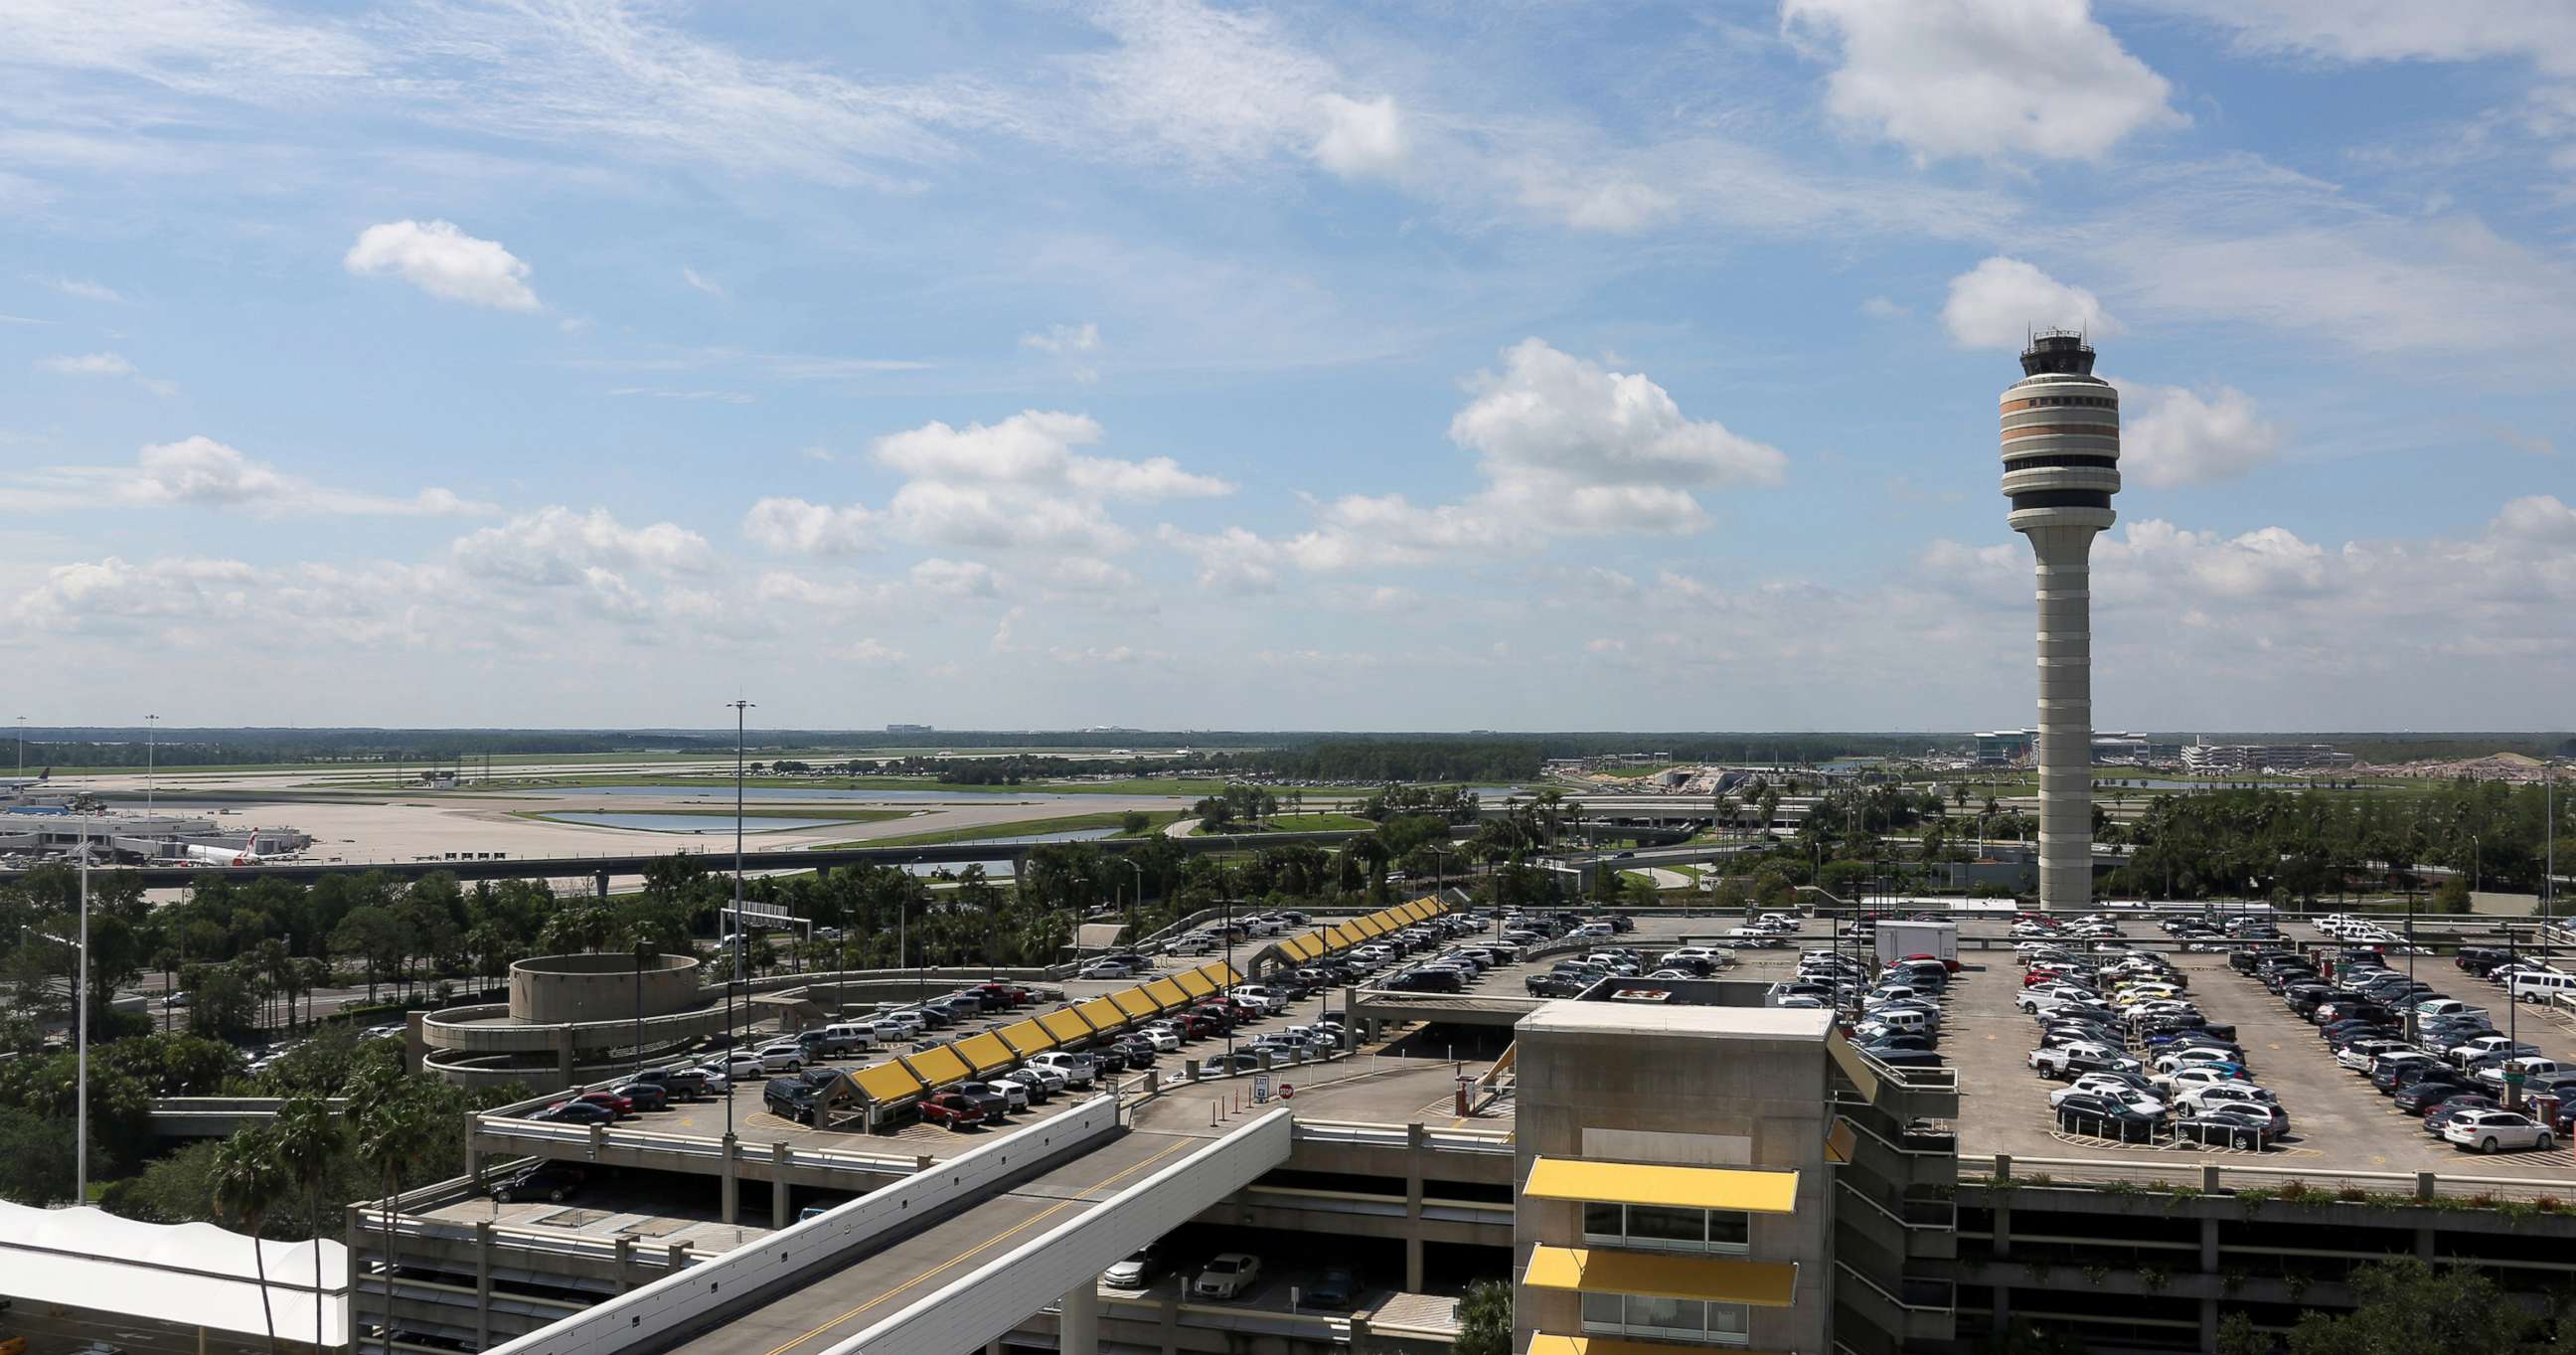 PHOTO: Control tower of the Orlando International Airport, on June 27, 2017.